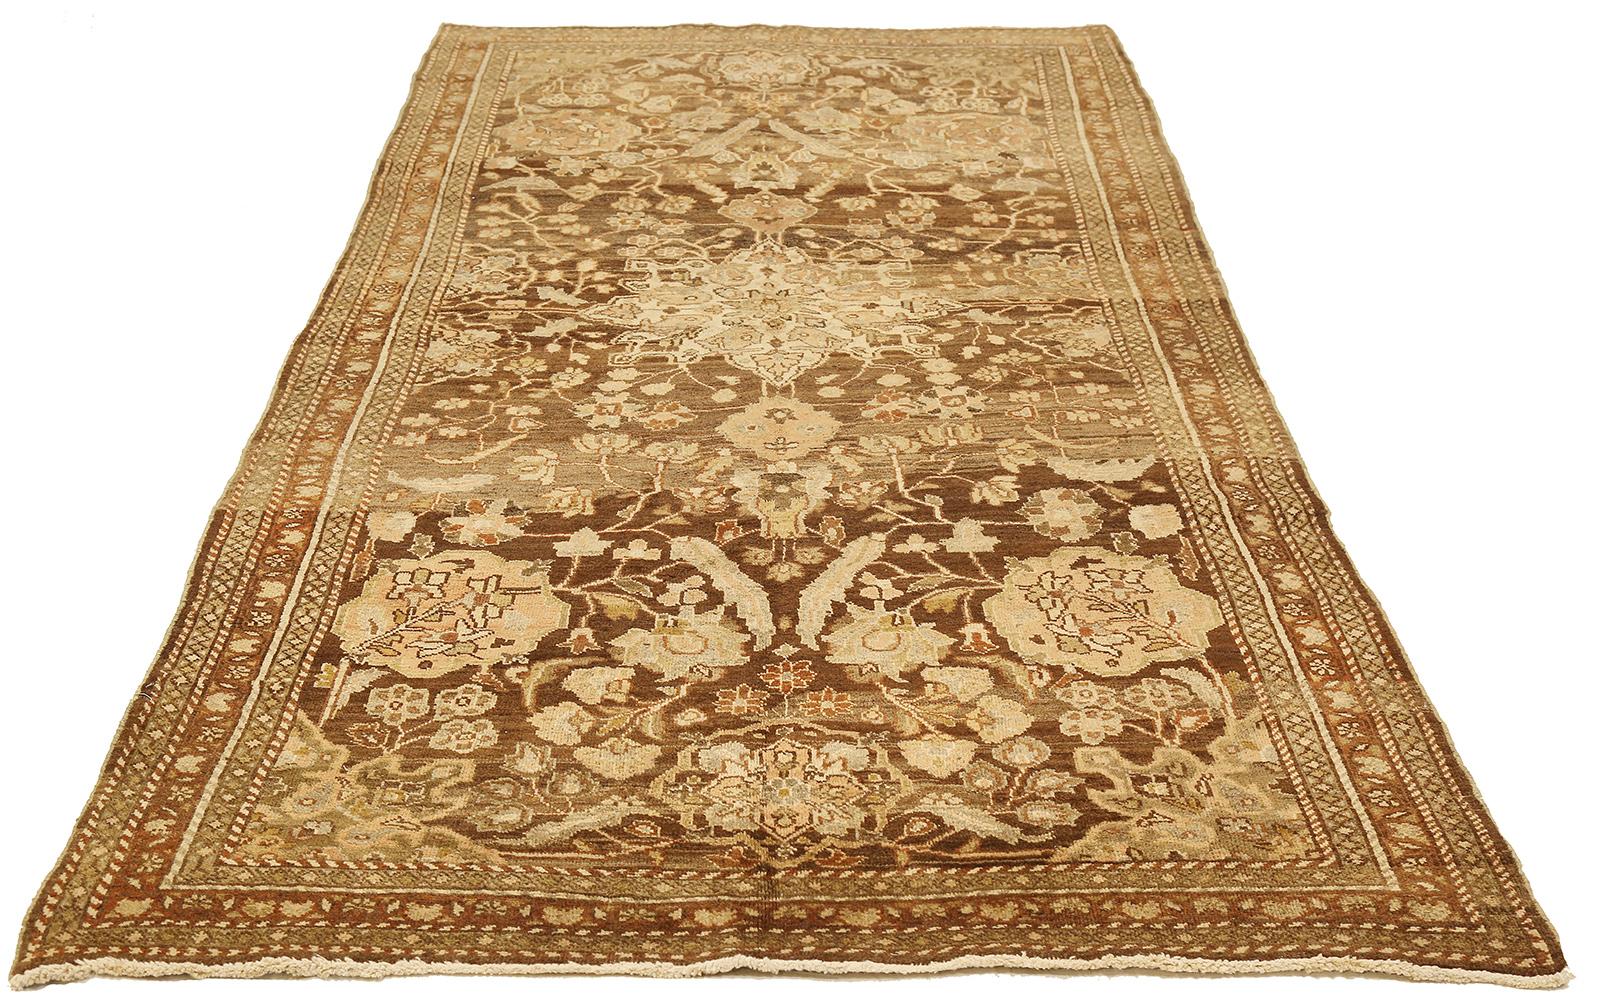 Antique Persian rug handwoven from the finest sheep’s wool and colored with all-natural vegetable dyes that are safe for humans and pets. It’s a traditional Mahal design featuring floral details in gray and ivory over a brown field. It’s a lovely